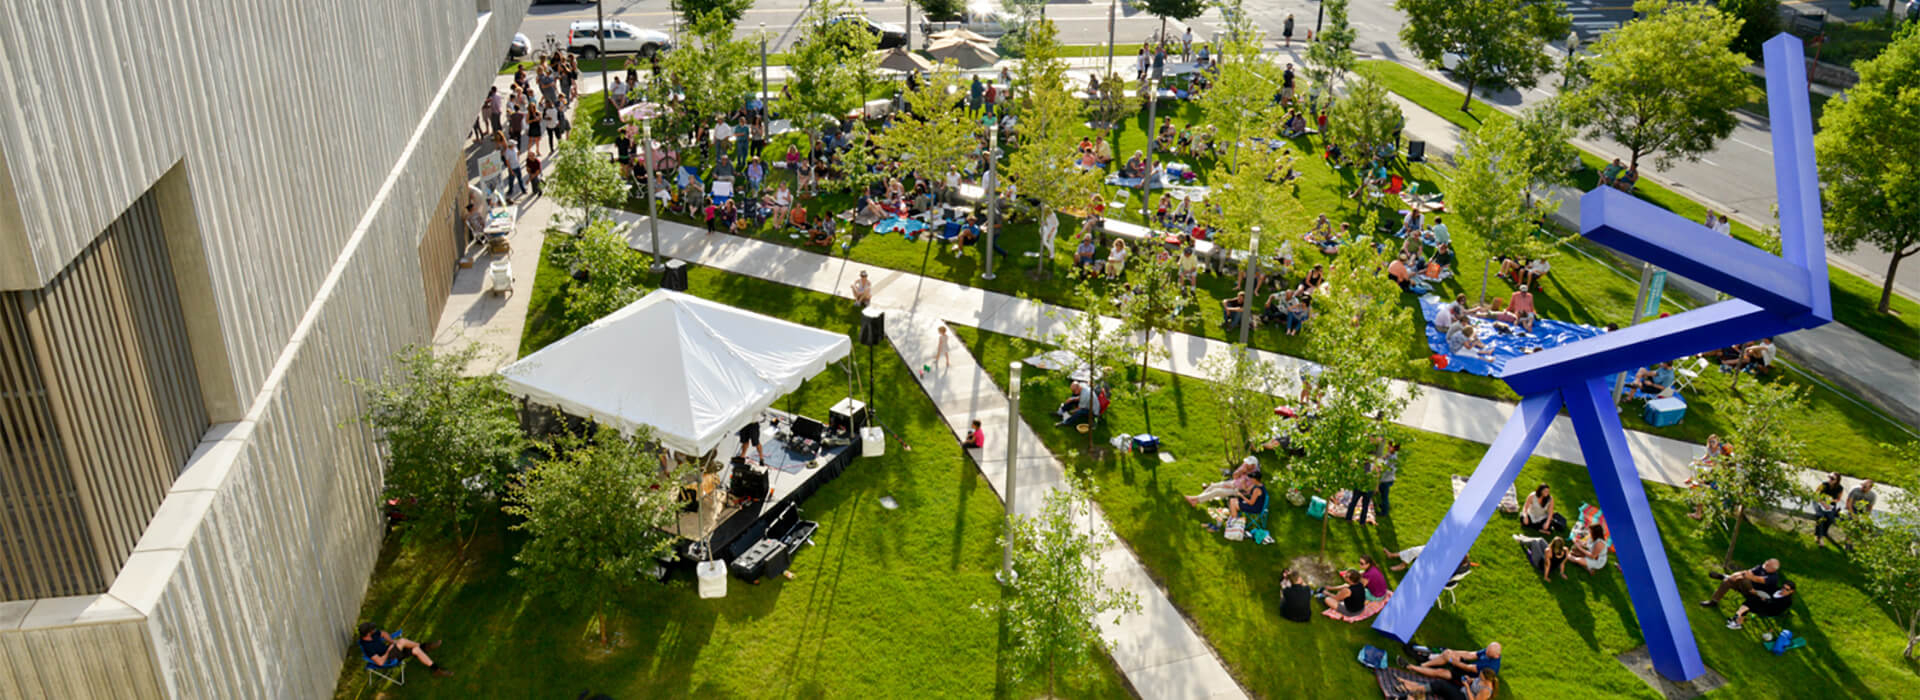 Looking down at the Clyfford Still Museum forecourt at a crowd attending a free lawn concert